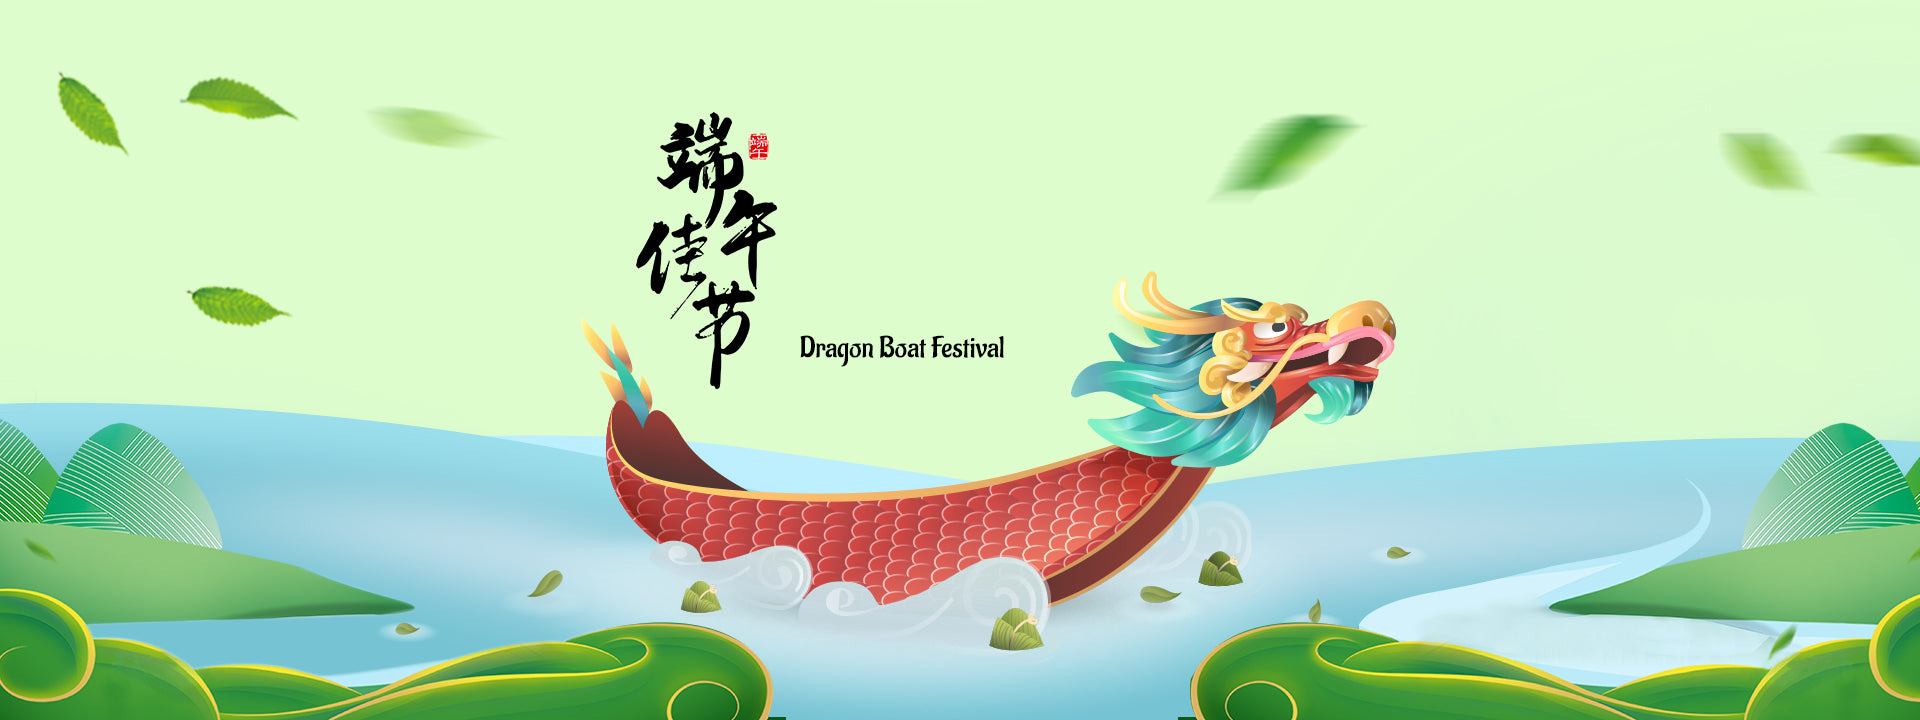 RayCue Dragon Boat Festival Holiday Notice